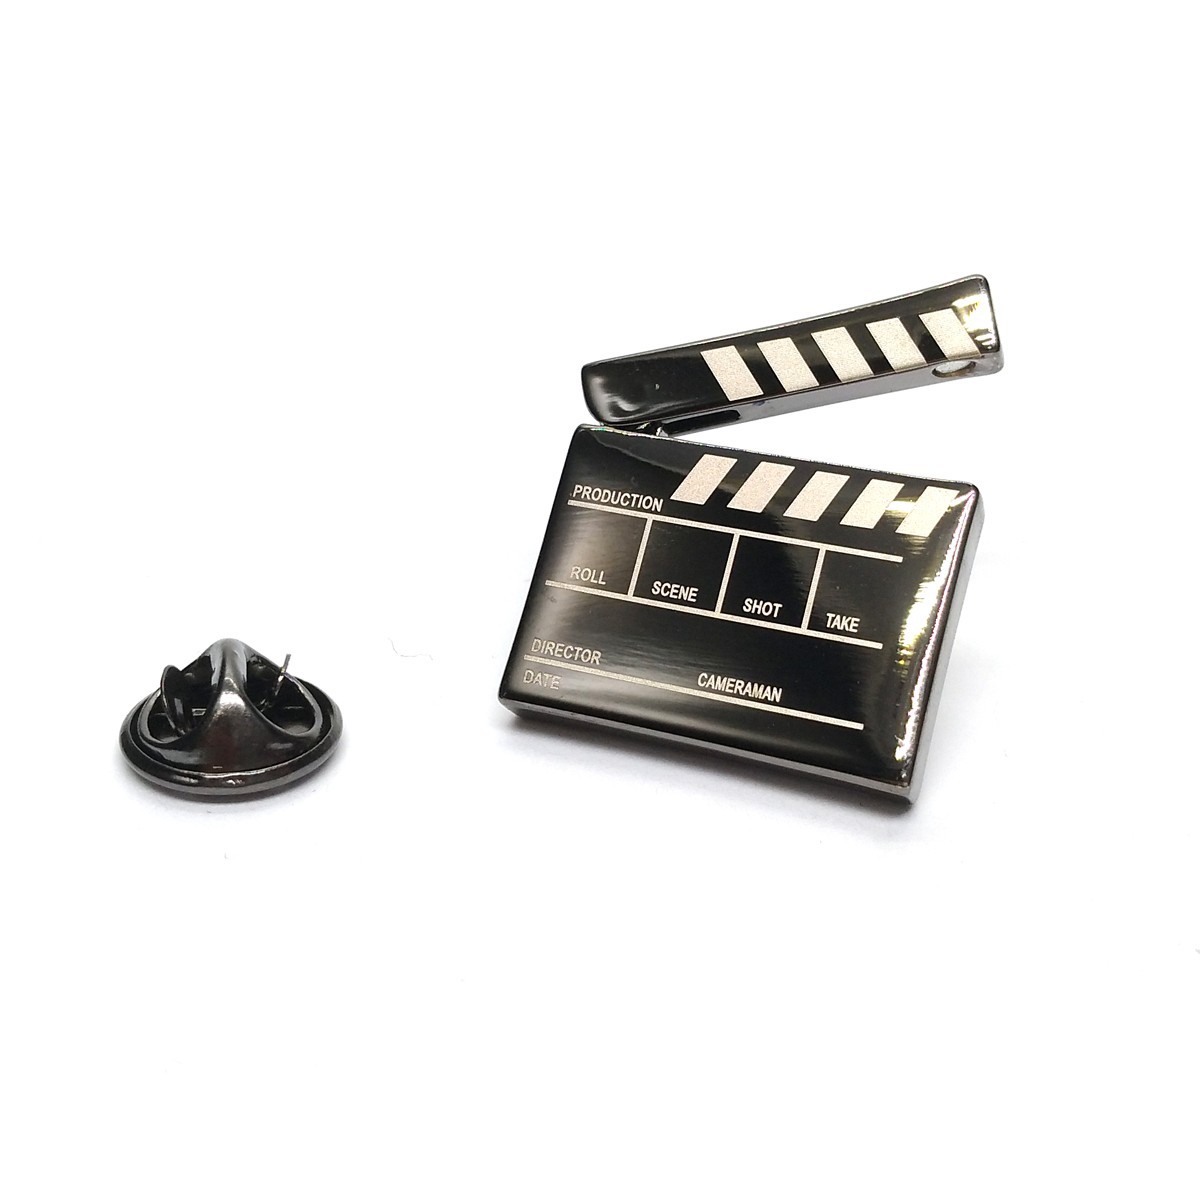 Film Clapper Board Lapel Badge with Moving Part